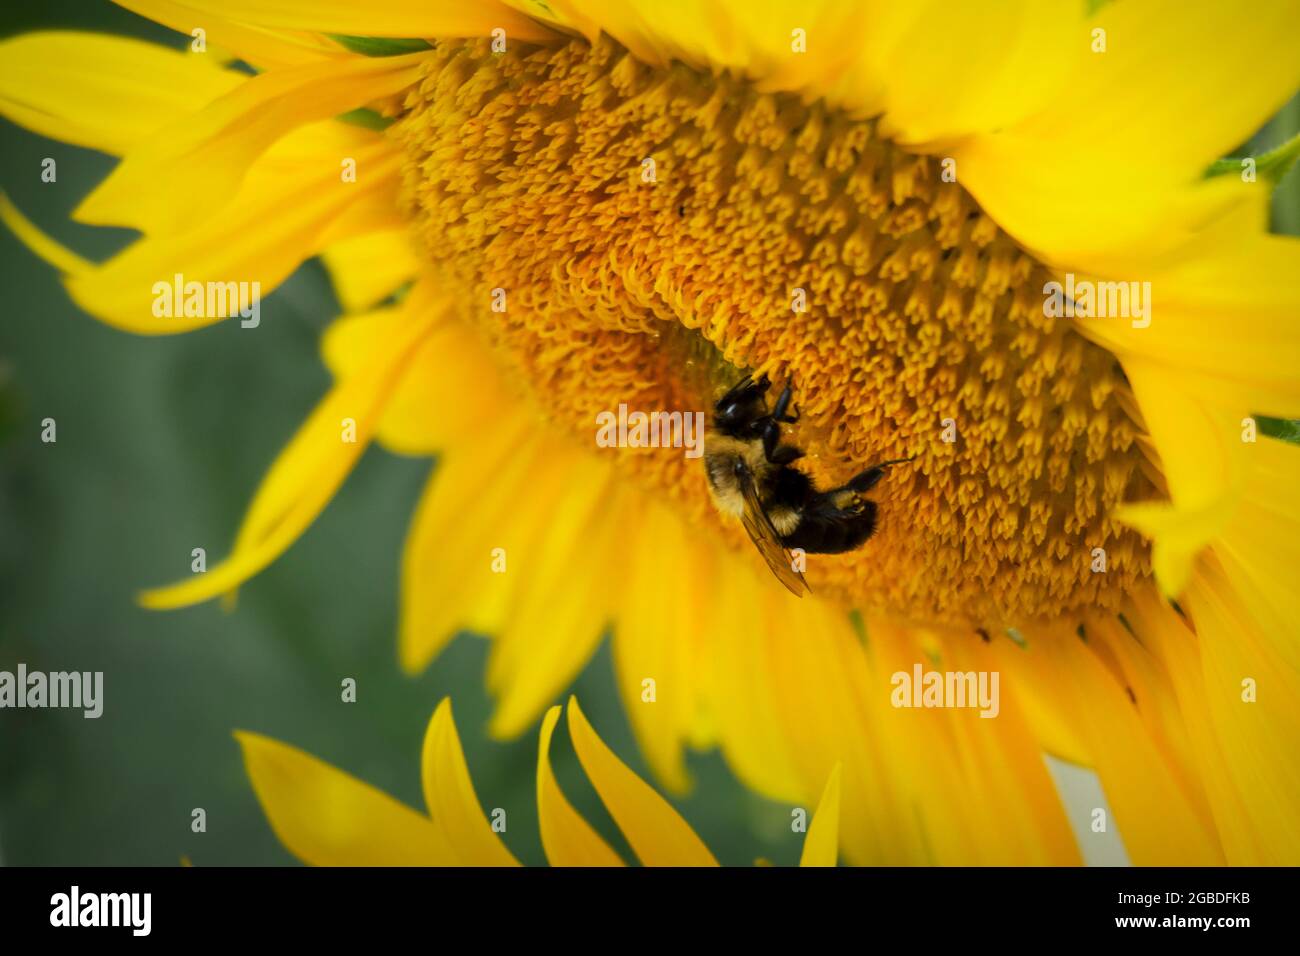 A bumble bee works on collecting pollen on a sunflower.  Close up view. Stock Photo